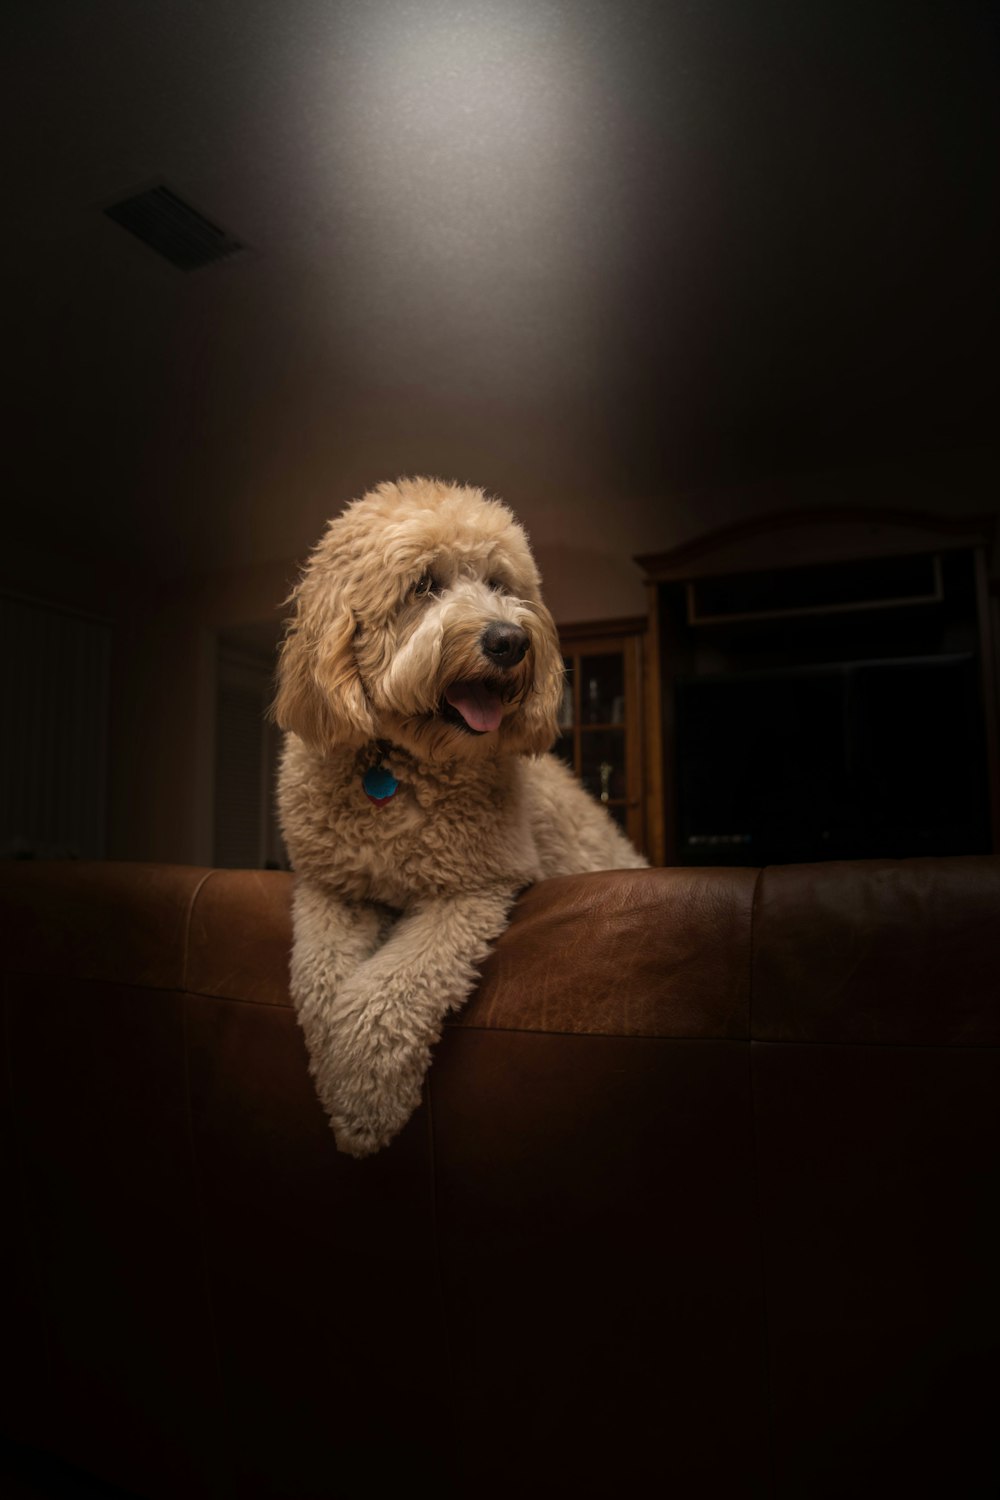 short-coat brown dog leaning on brown leather sofa inside room